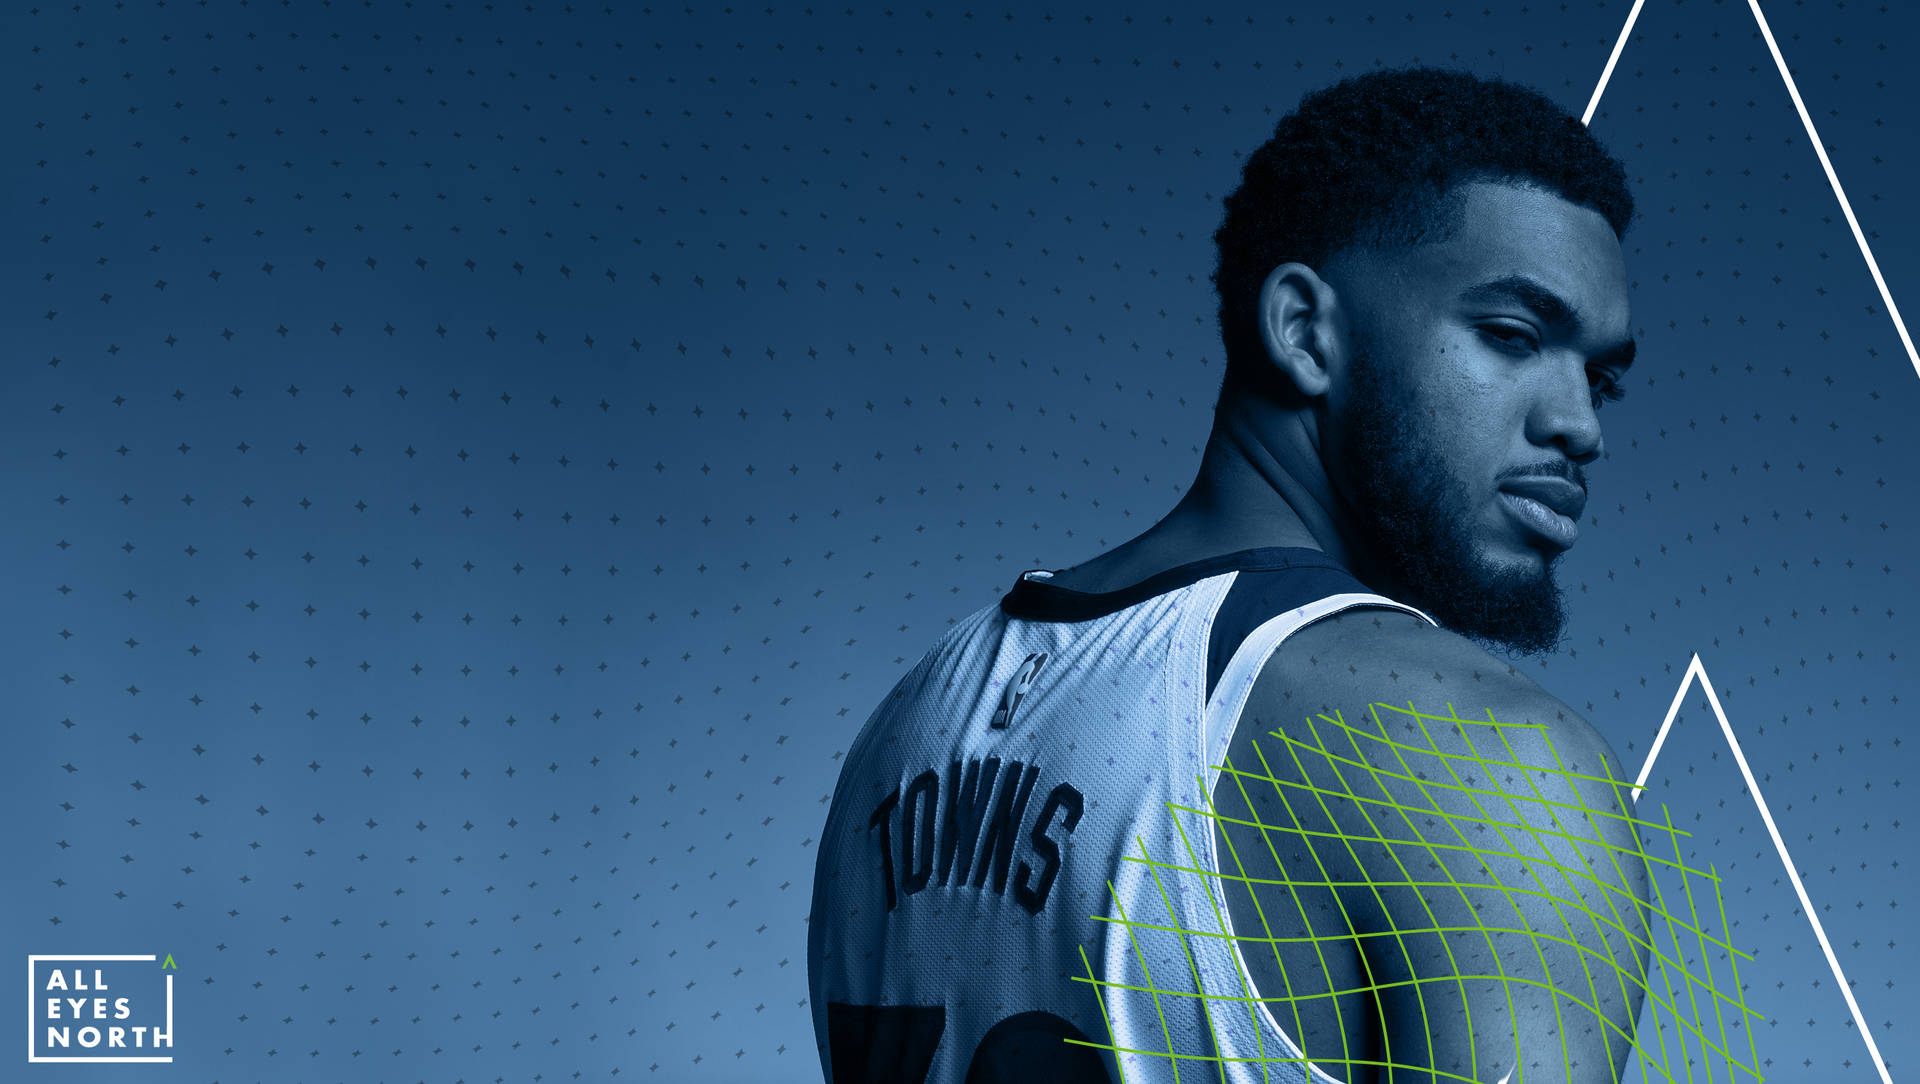 Karl-anthony Towns Monochromatic Blue Poster Background